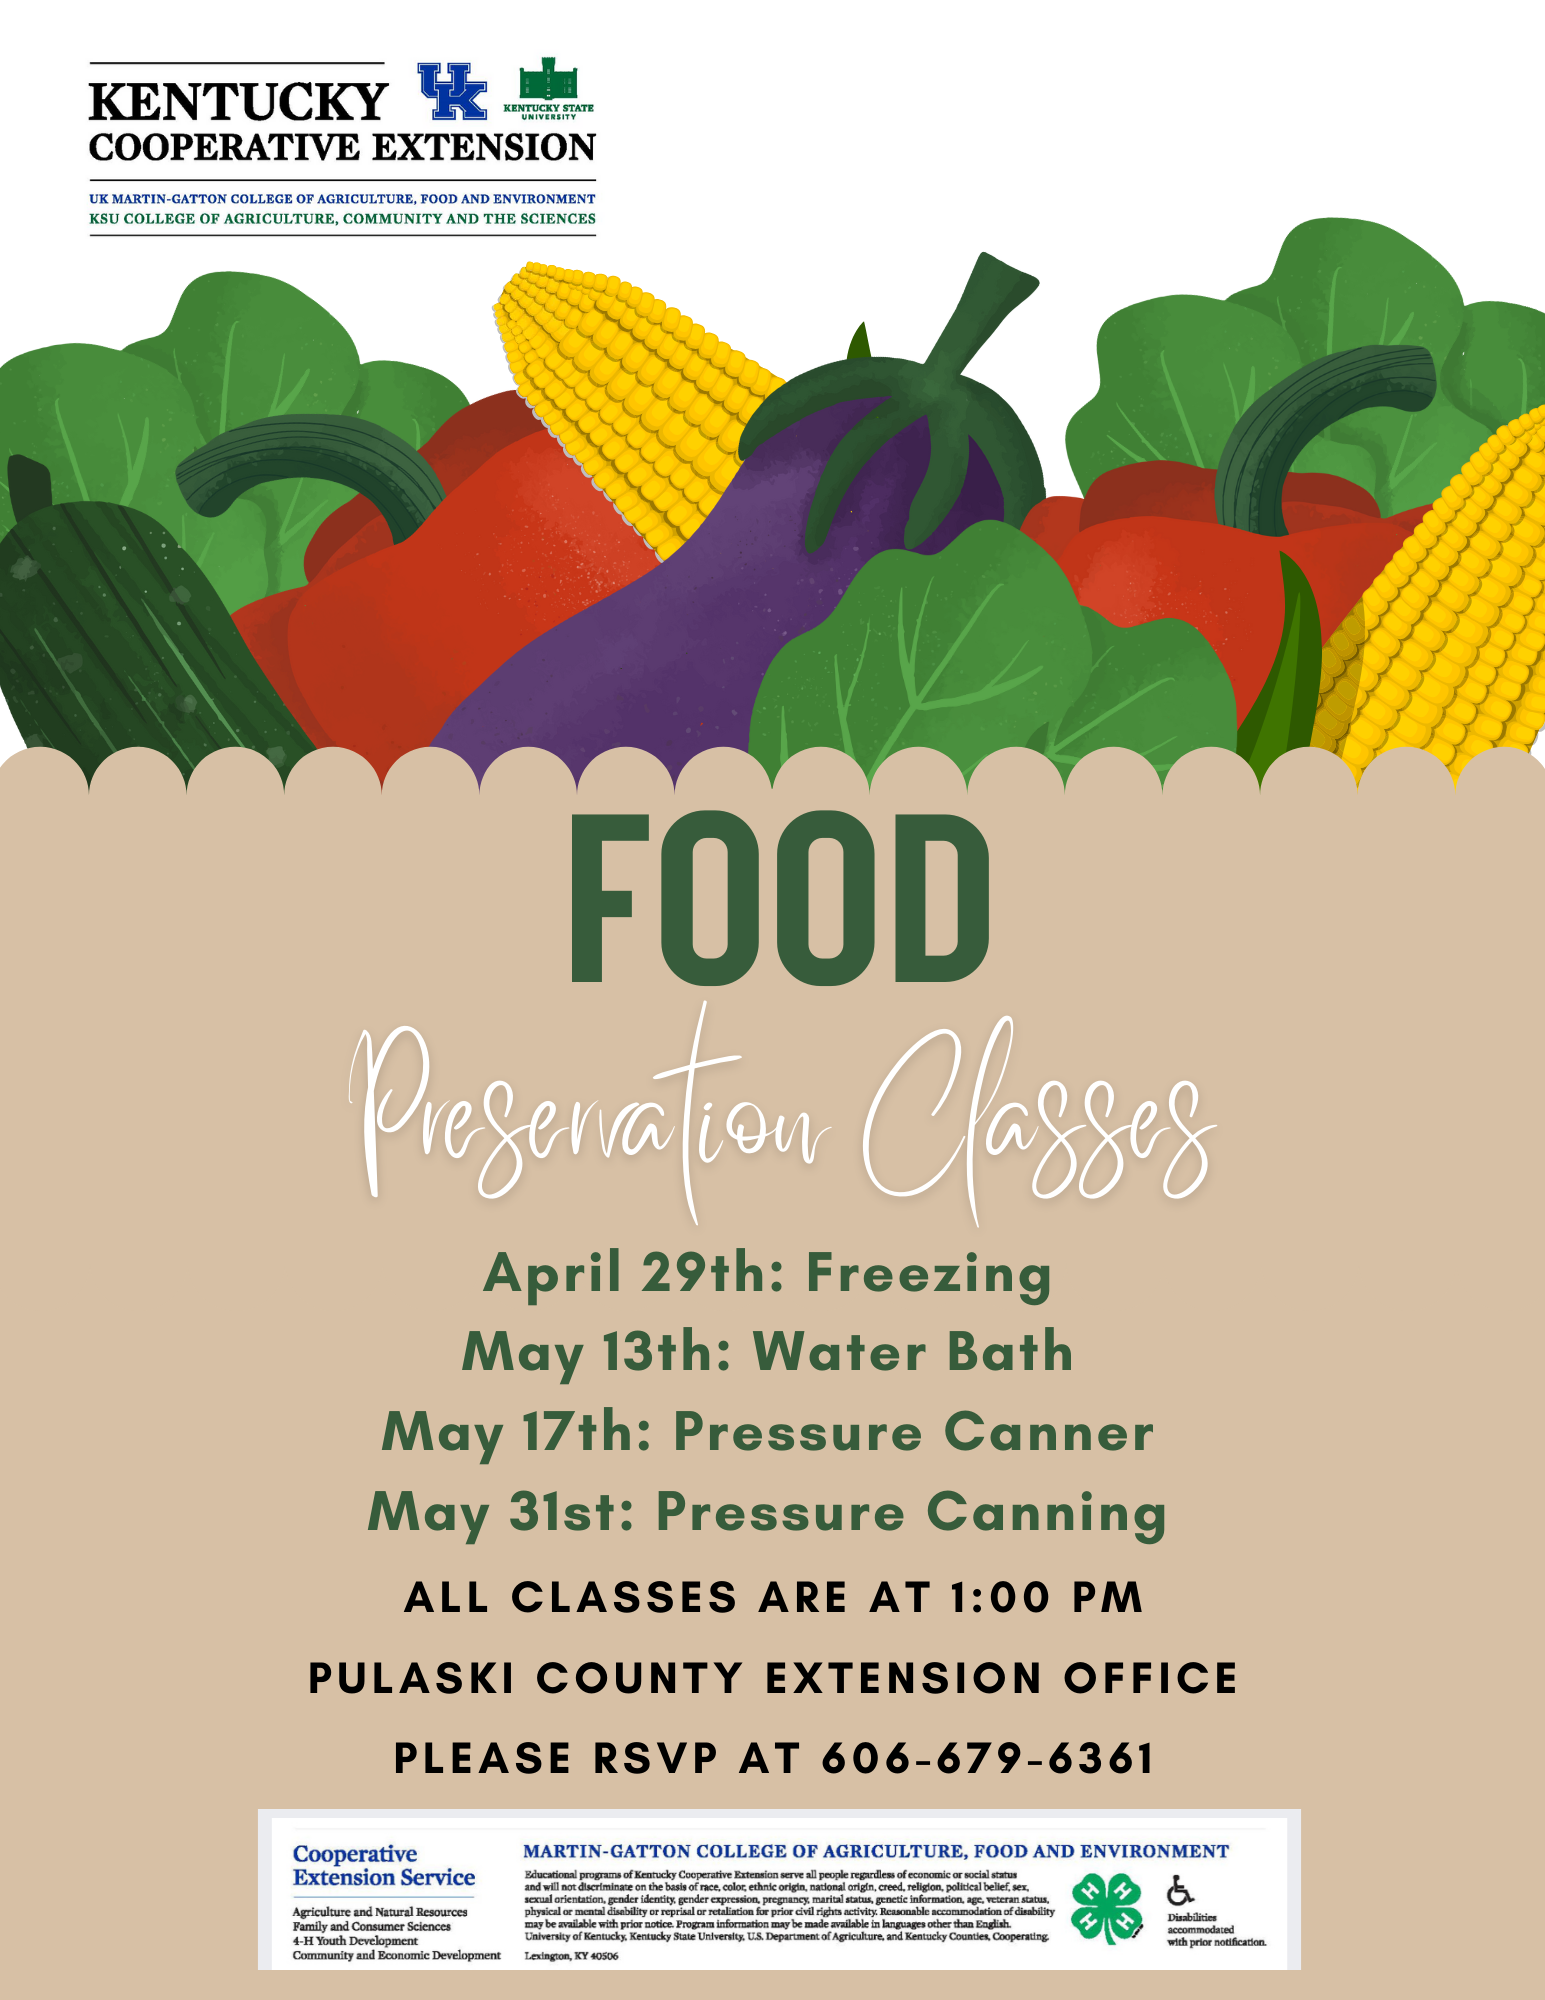 flyer for food preservation classes call 606-679-6361 for more information